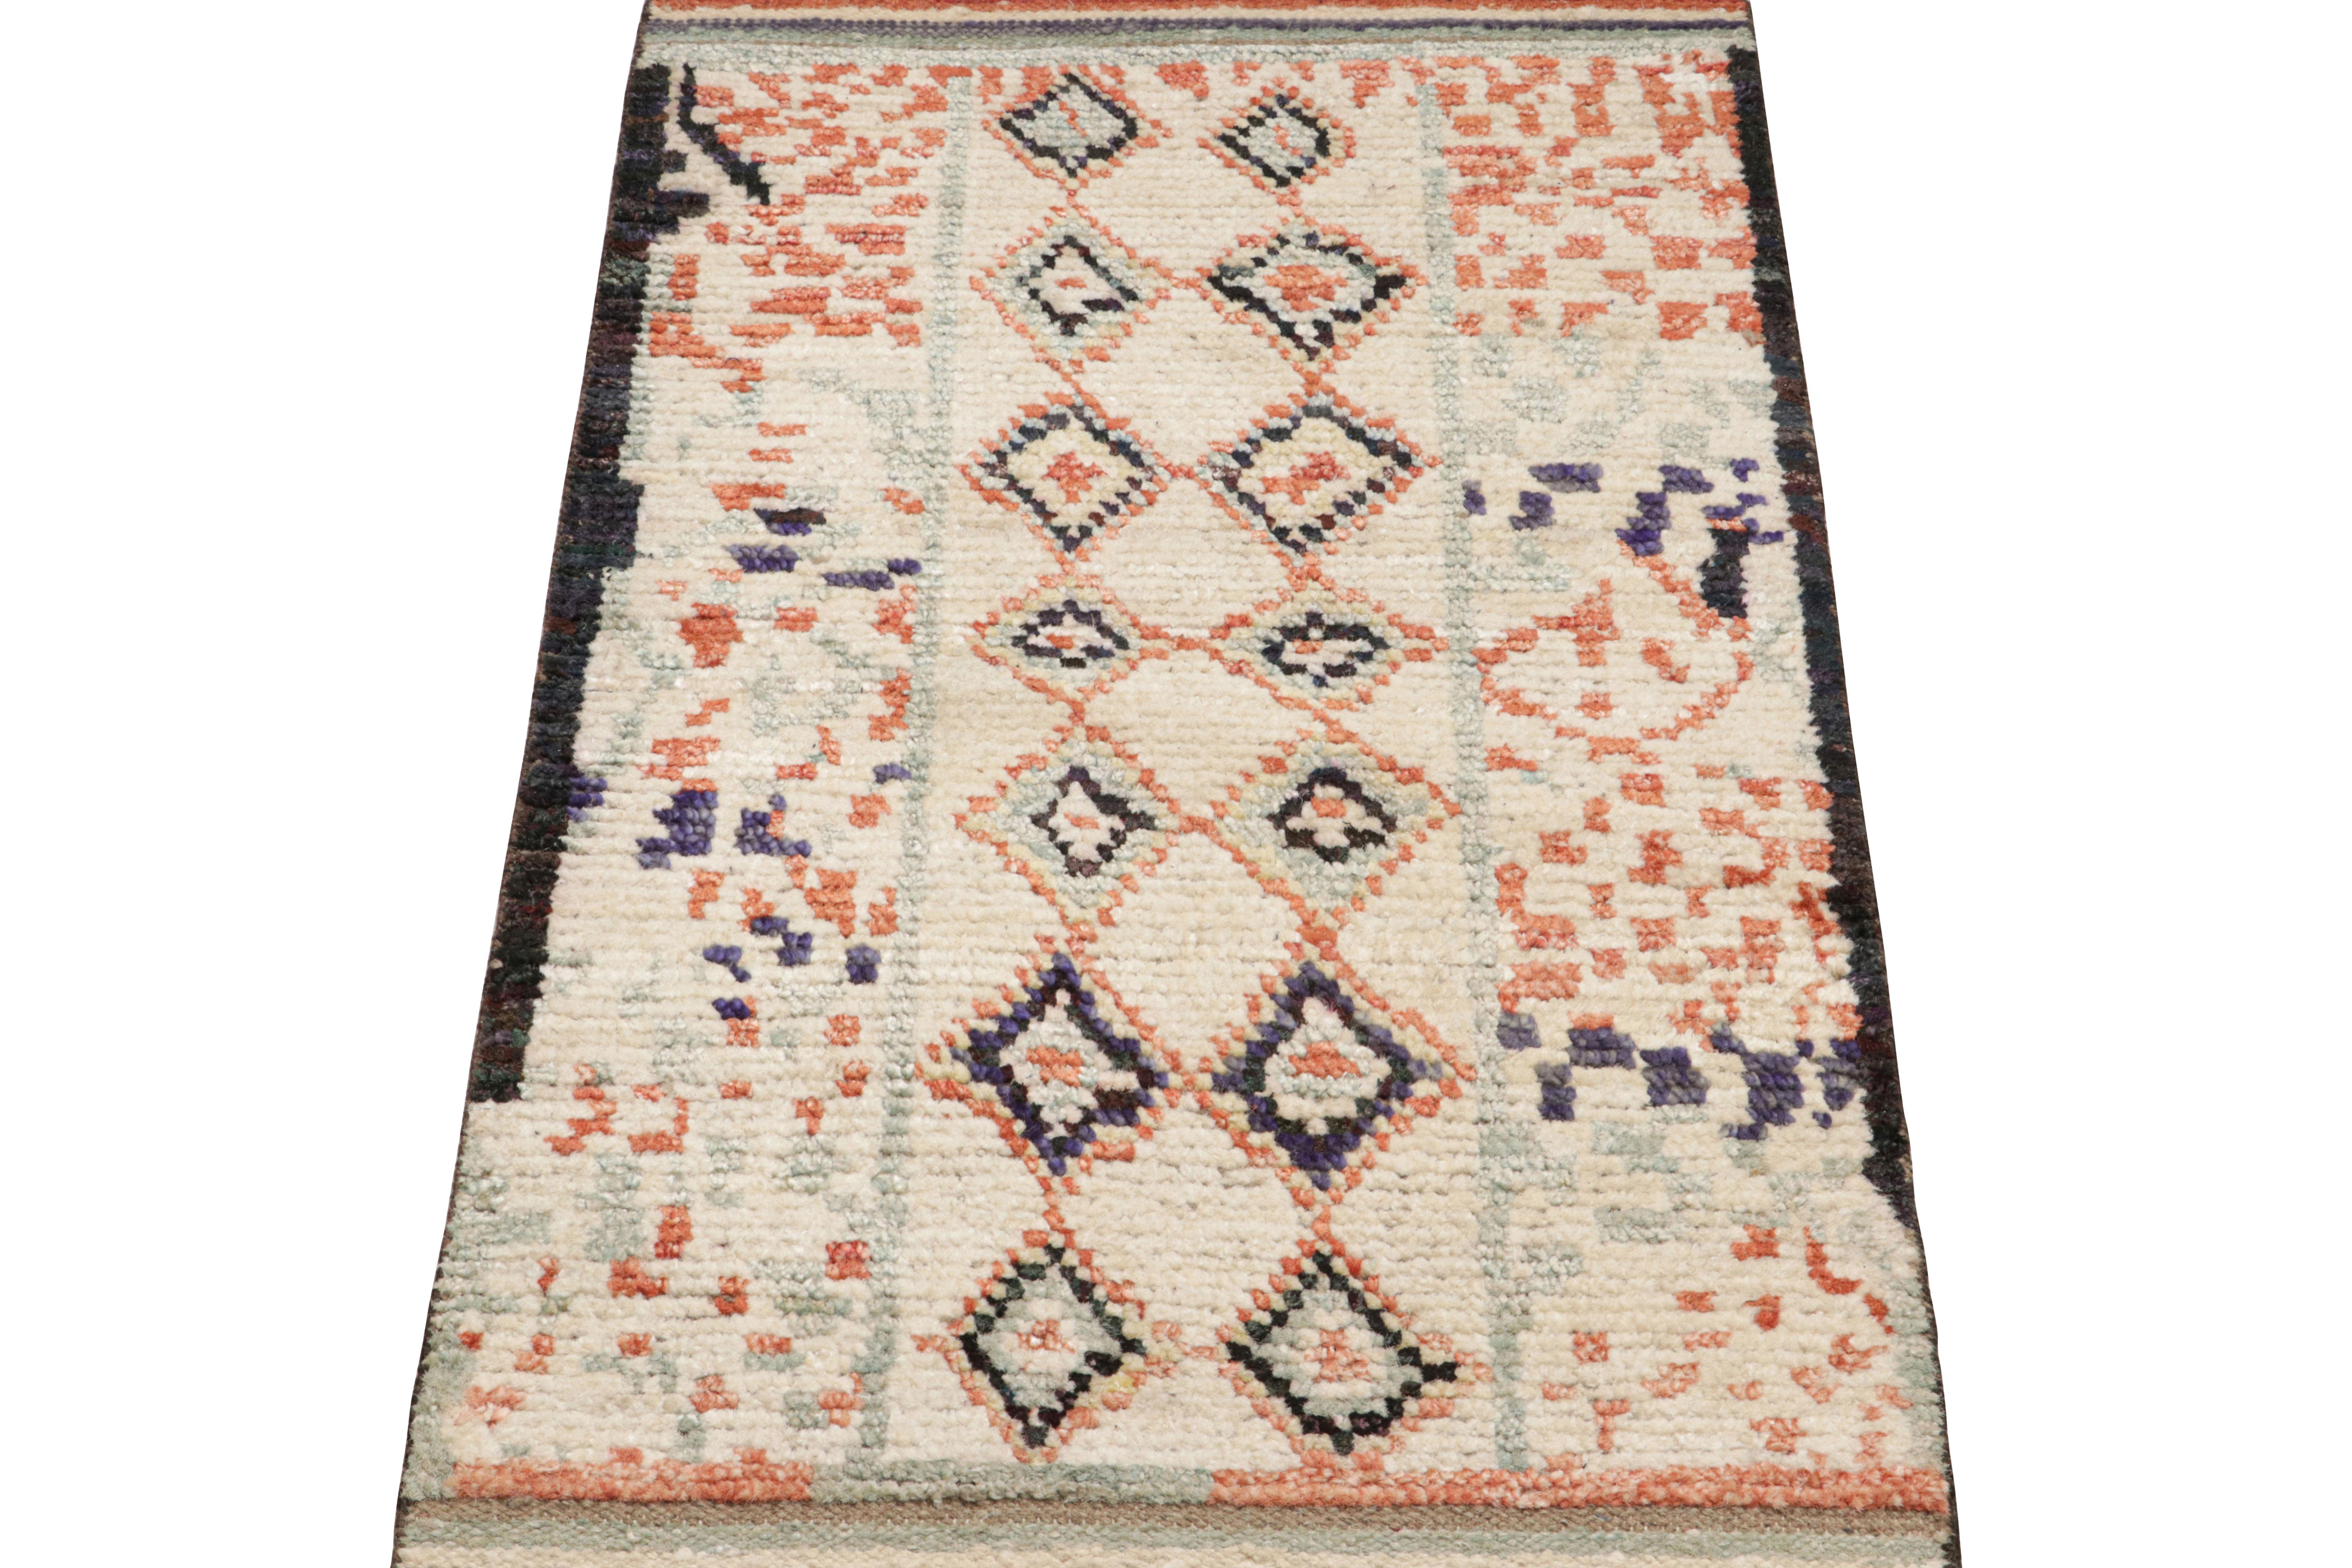 Hand-knotted in wool and silk, this 2x3 Moroccan rug features geometric patterns inspired by primitivist Berber weaving traditions and same ribbed texture drawing on Boucherouite sensibilities. 

On the Design: 

Connoisseurs may admire the subtle